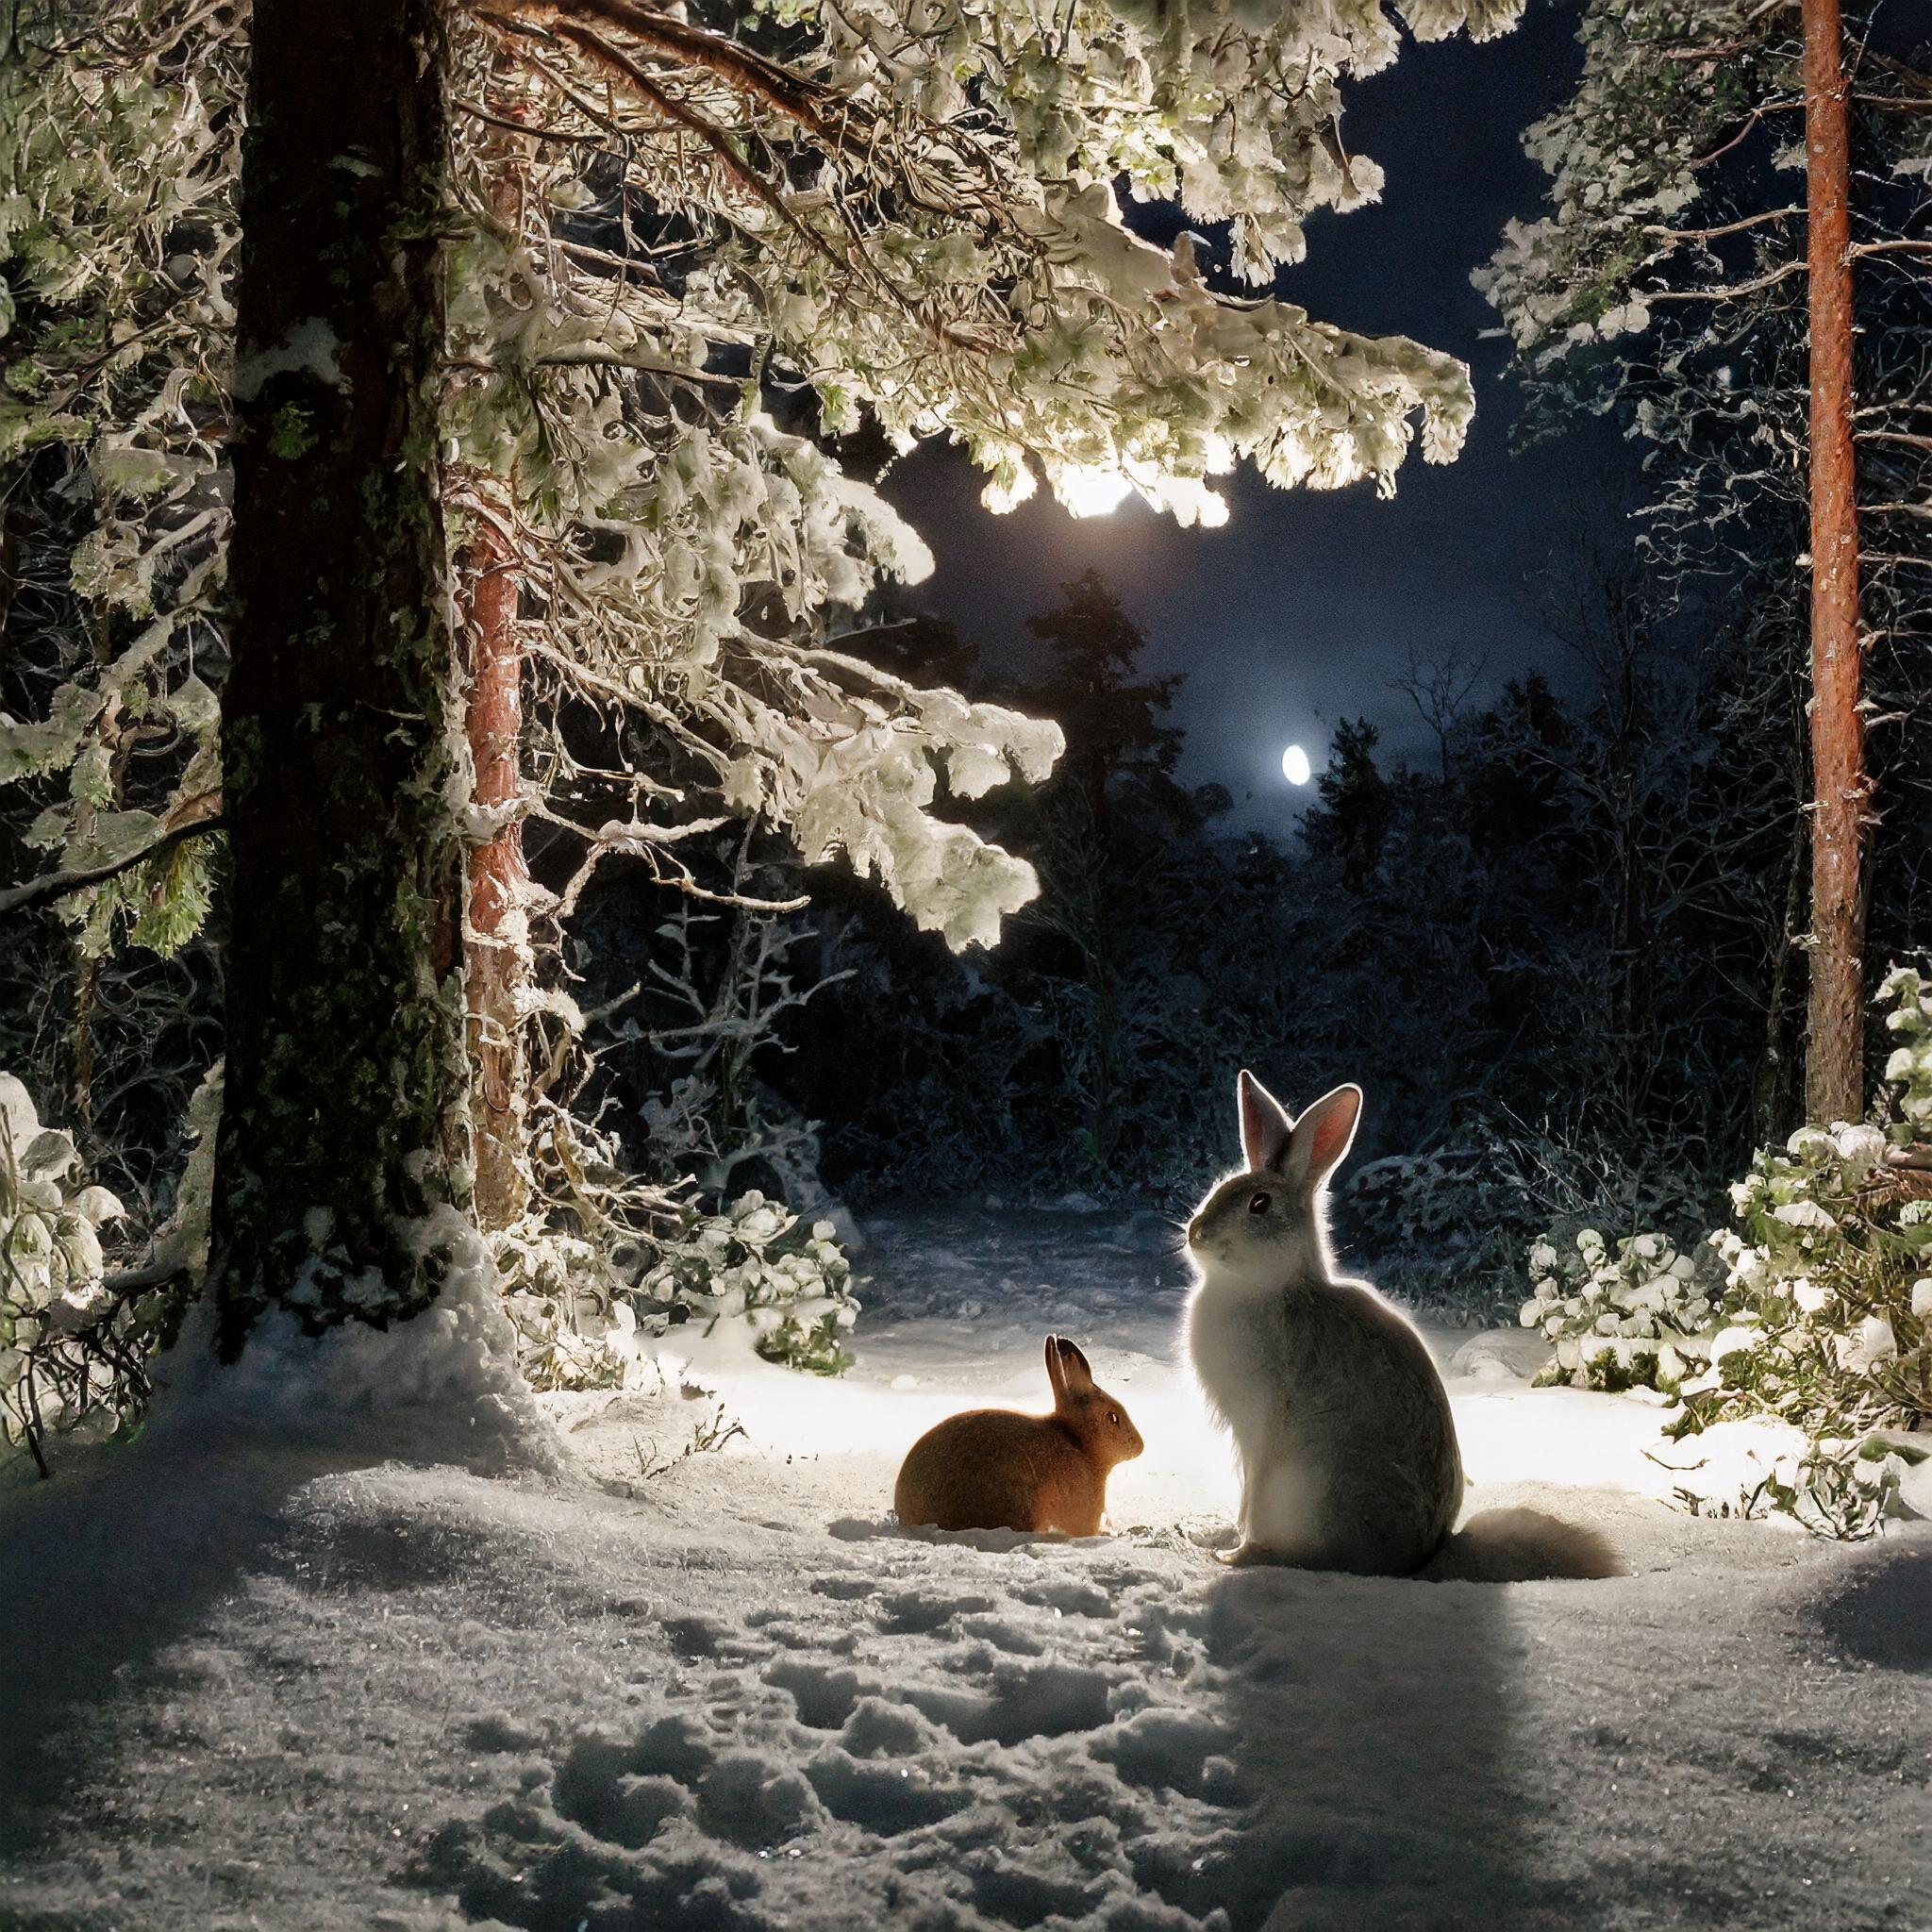 photo of swedish woods at night, covered in snow with rabits.